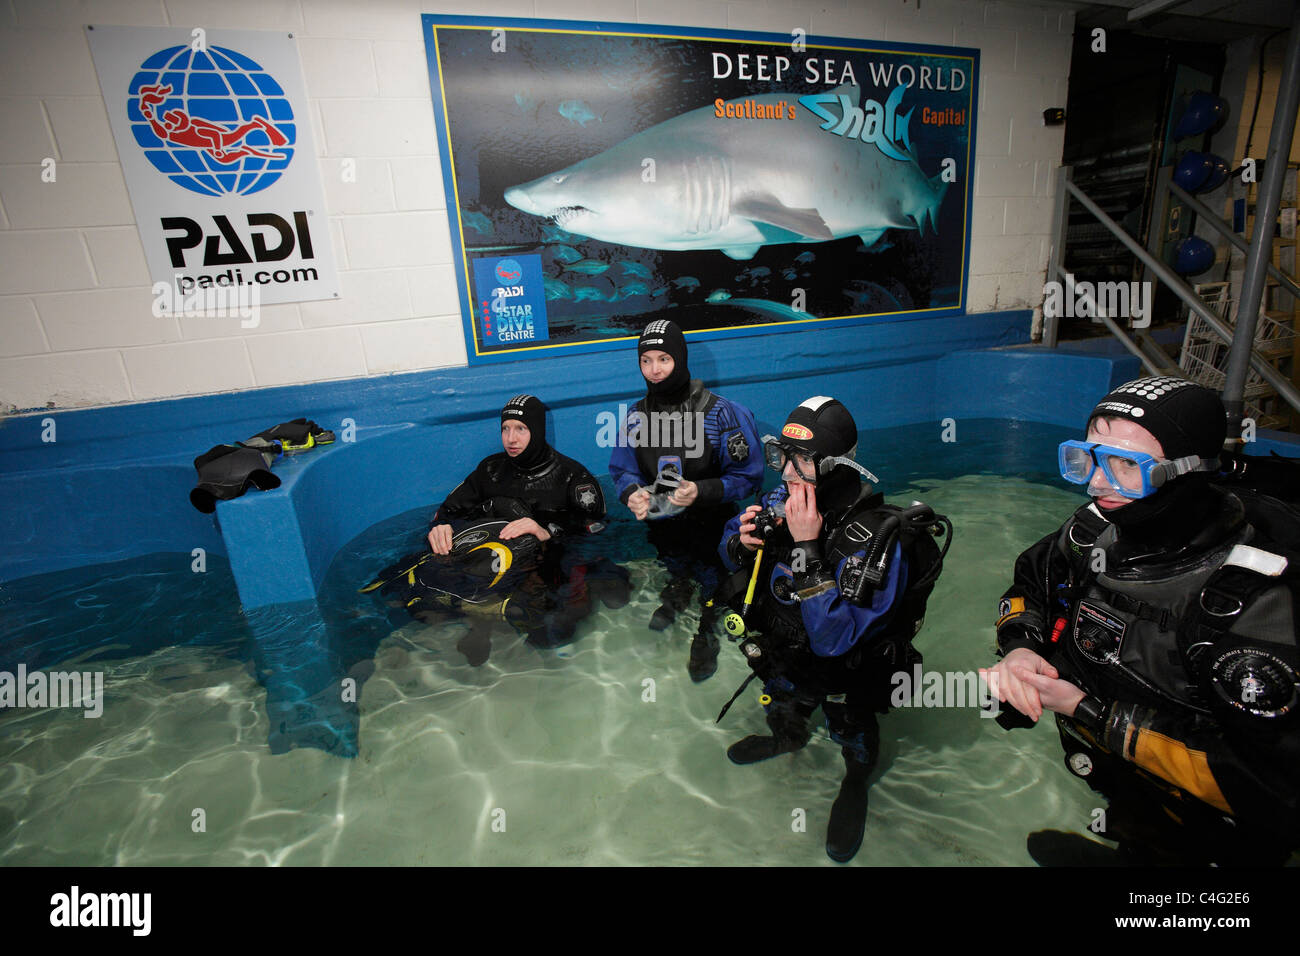 Divers kit-up before entering the aquarium at Deep Sea World to dive with the Sand tiger sharks which are the main attractions Stock Photo